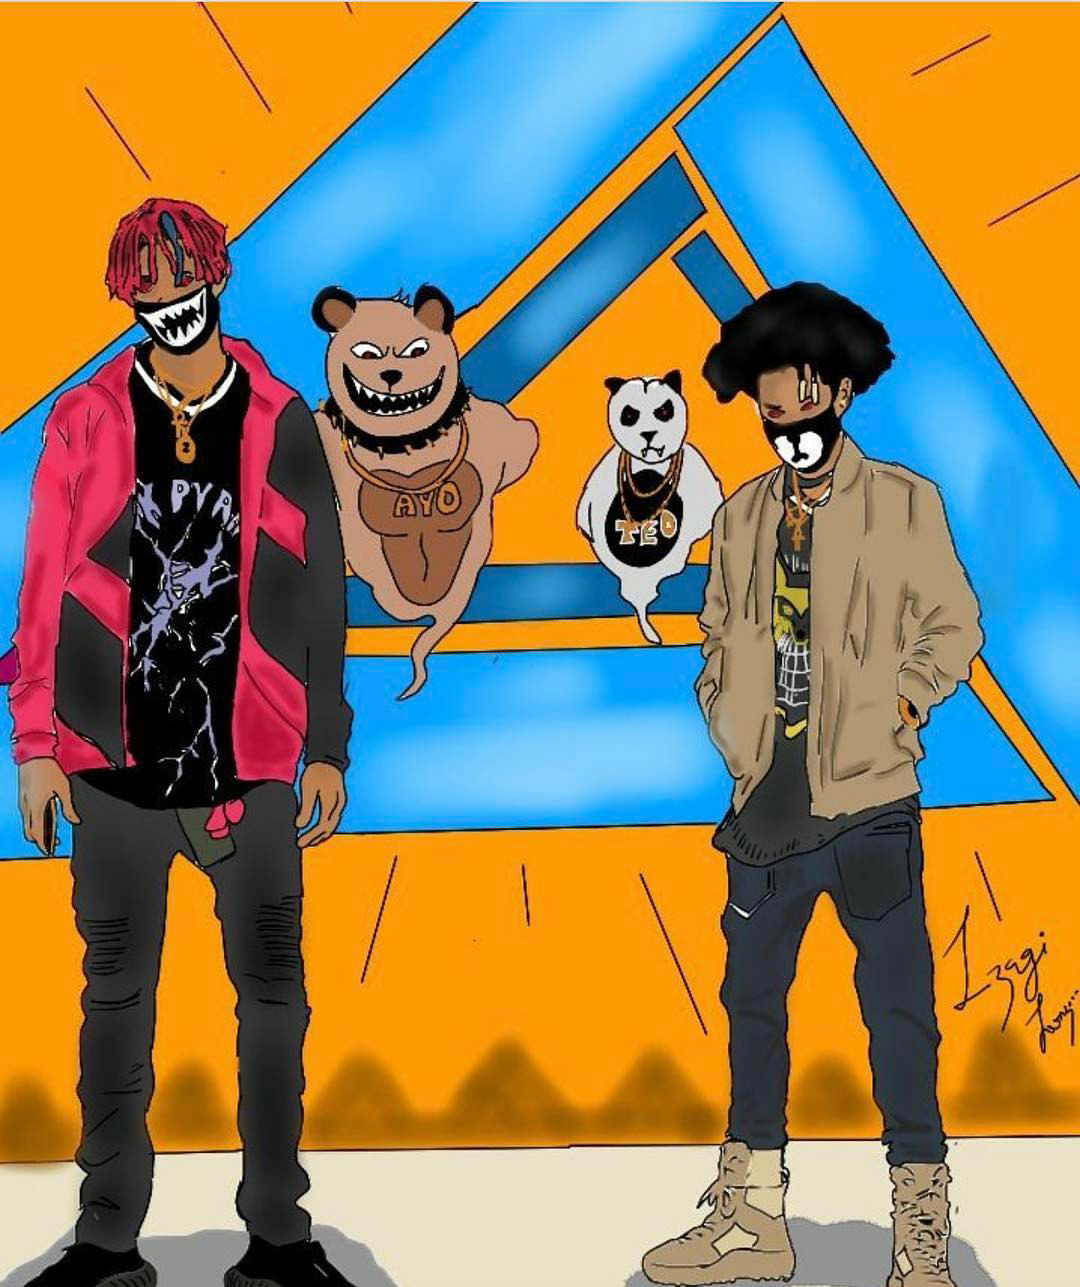 Ayo And Teo Iphone Wallpapers